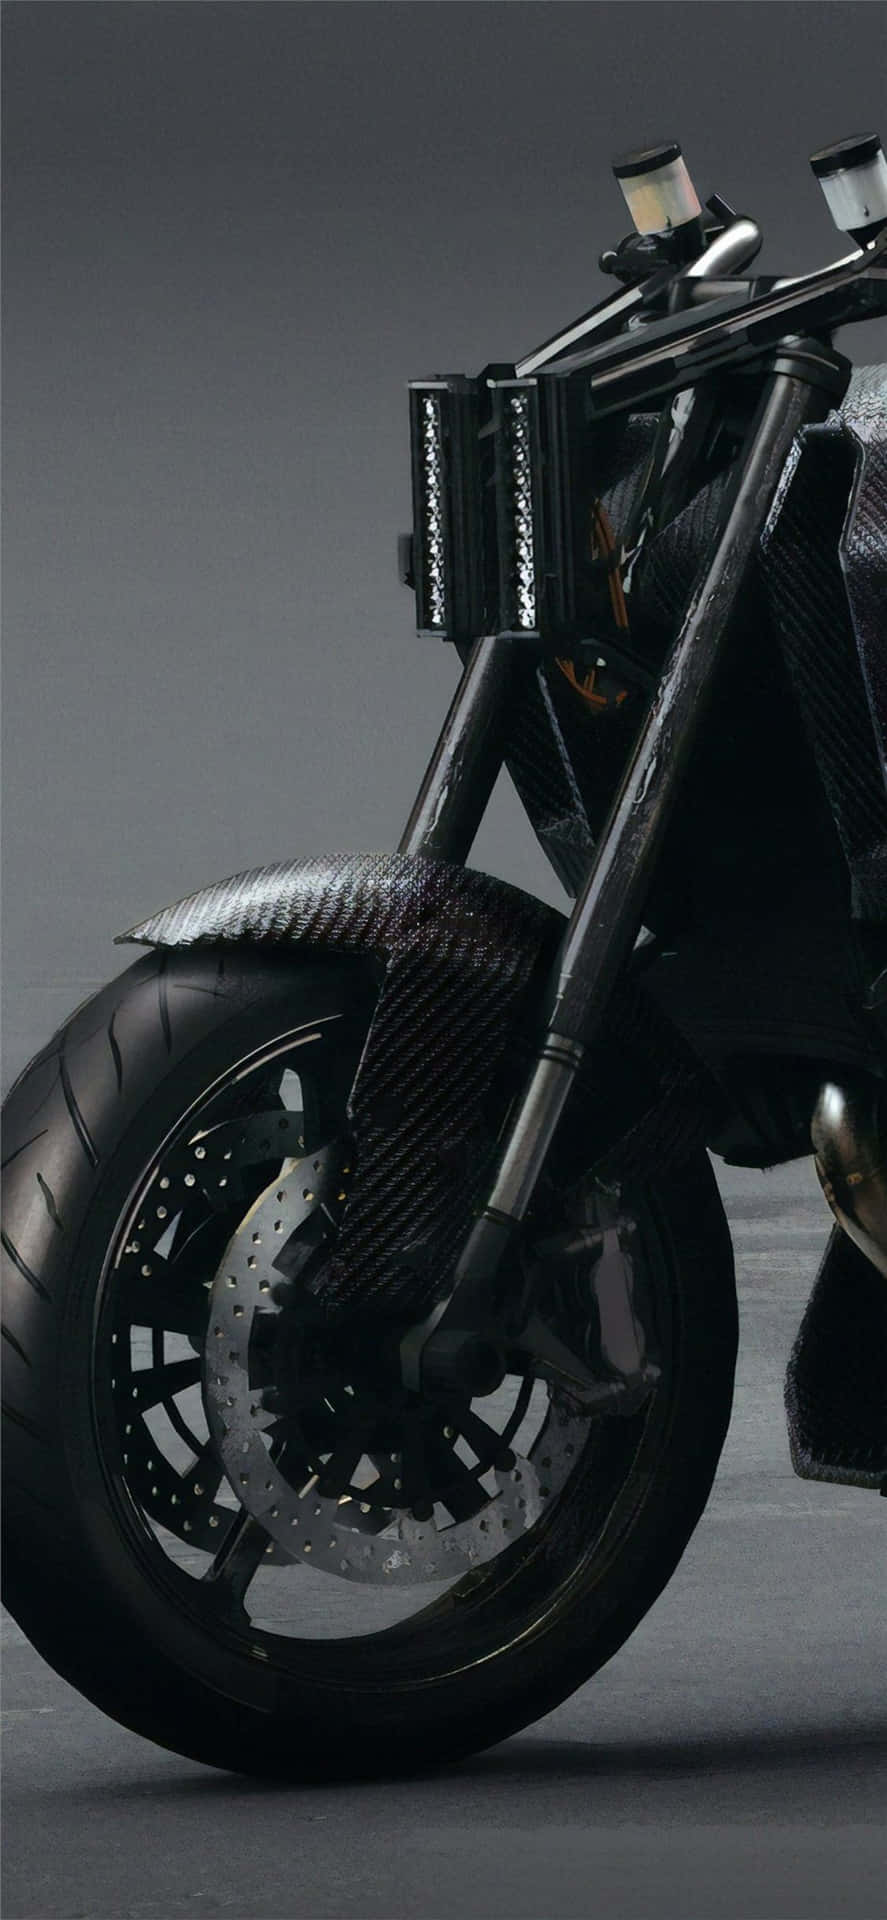 Motorcycle Iphone Black Front Wallpaper